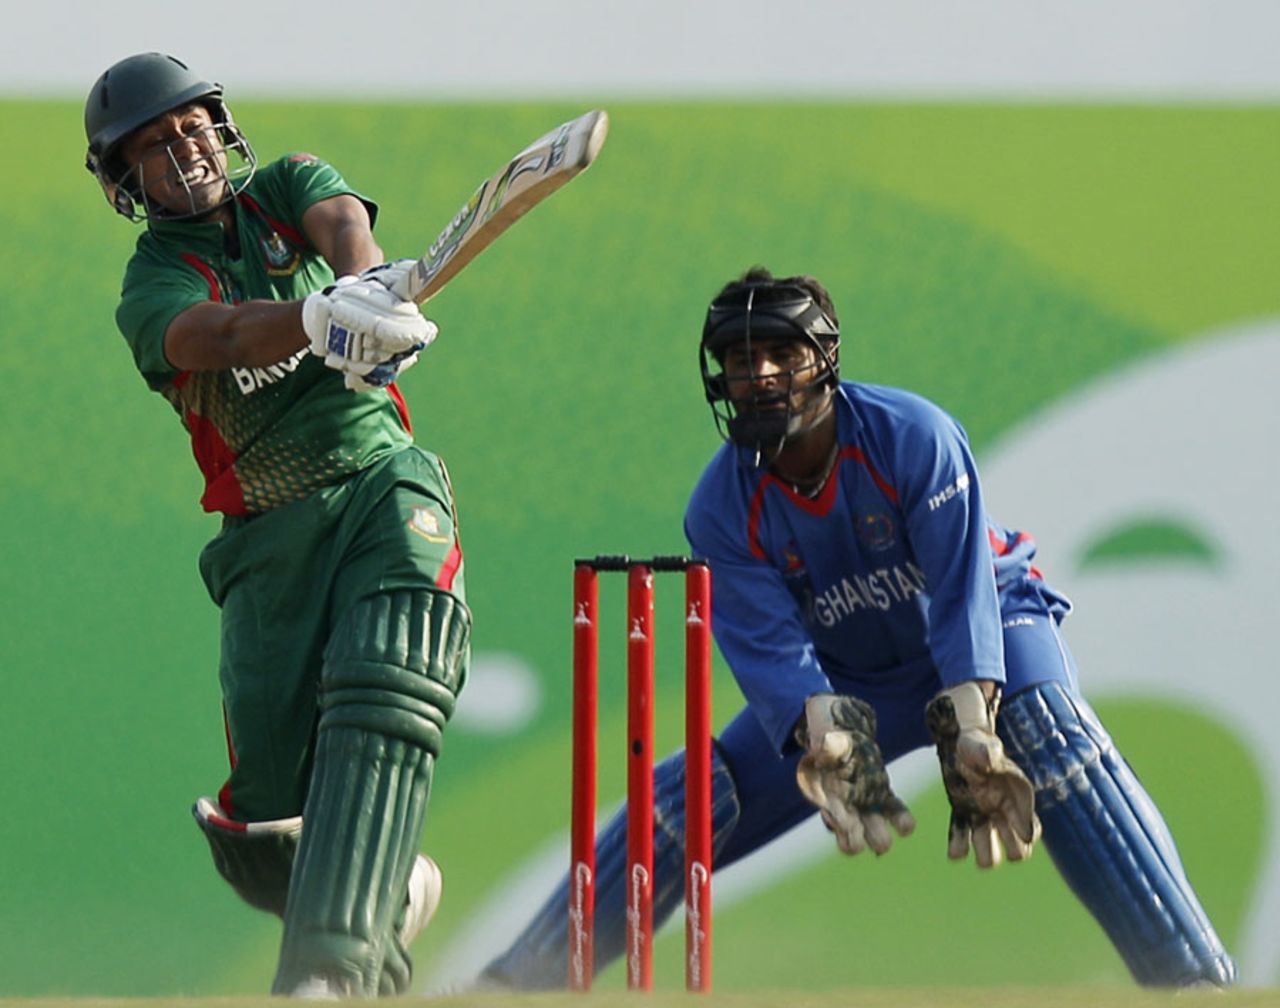 Mithun Ali hit a six and two fours in his 22, Afghanistan v Bangladesh, final, Asian Games, Guangzhou, November 26, 2010